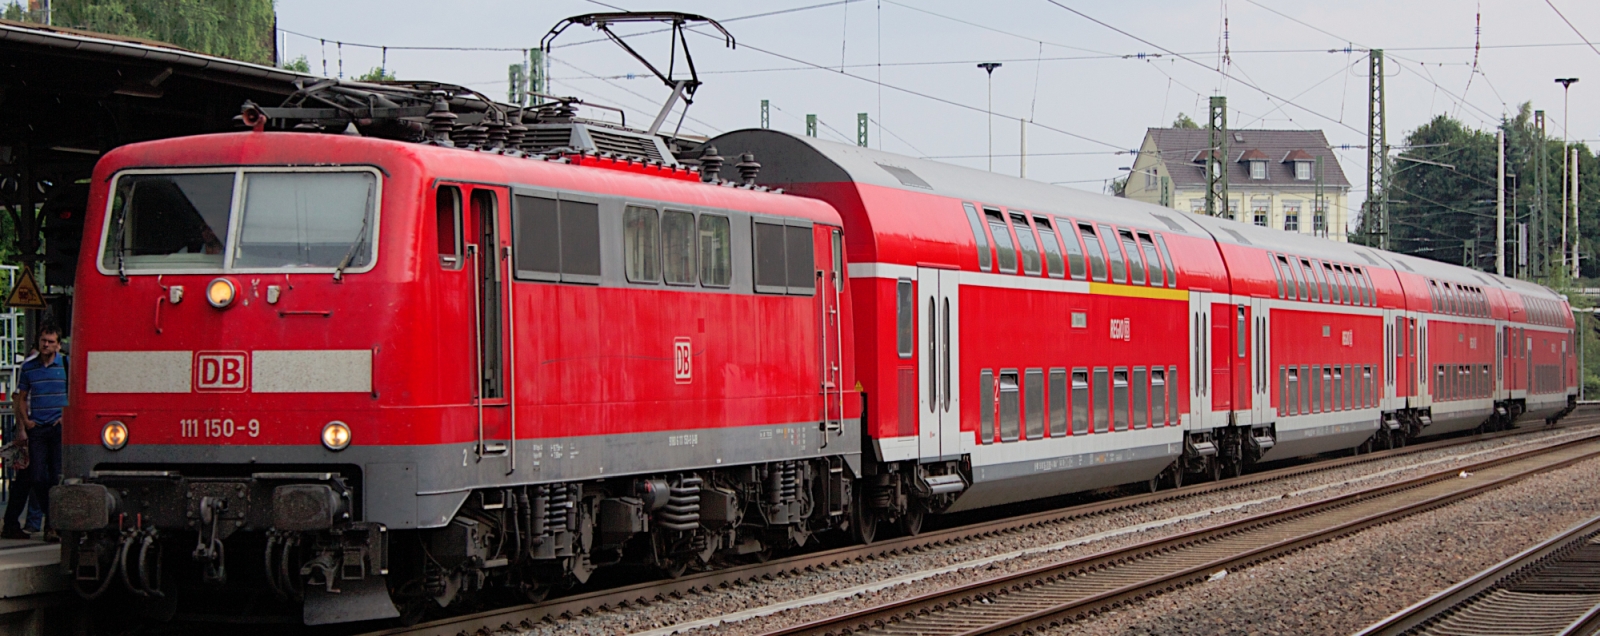 111 150 with a set of double-deck coaches in July 2013 in Solingen